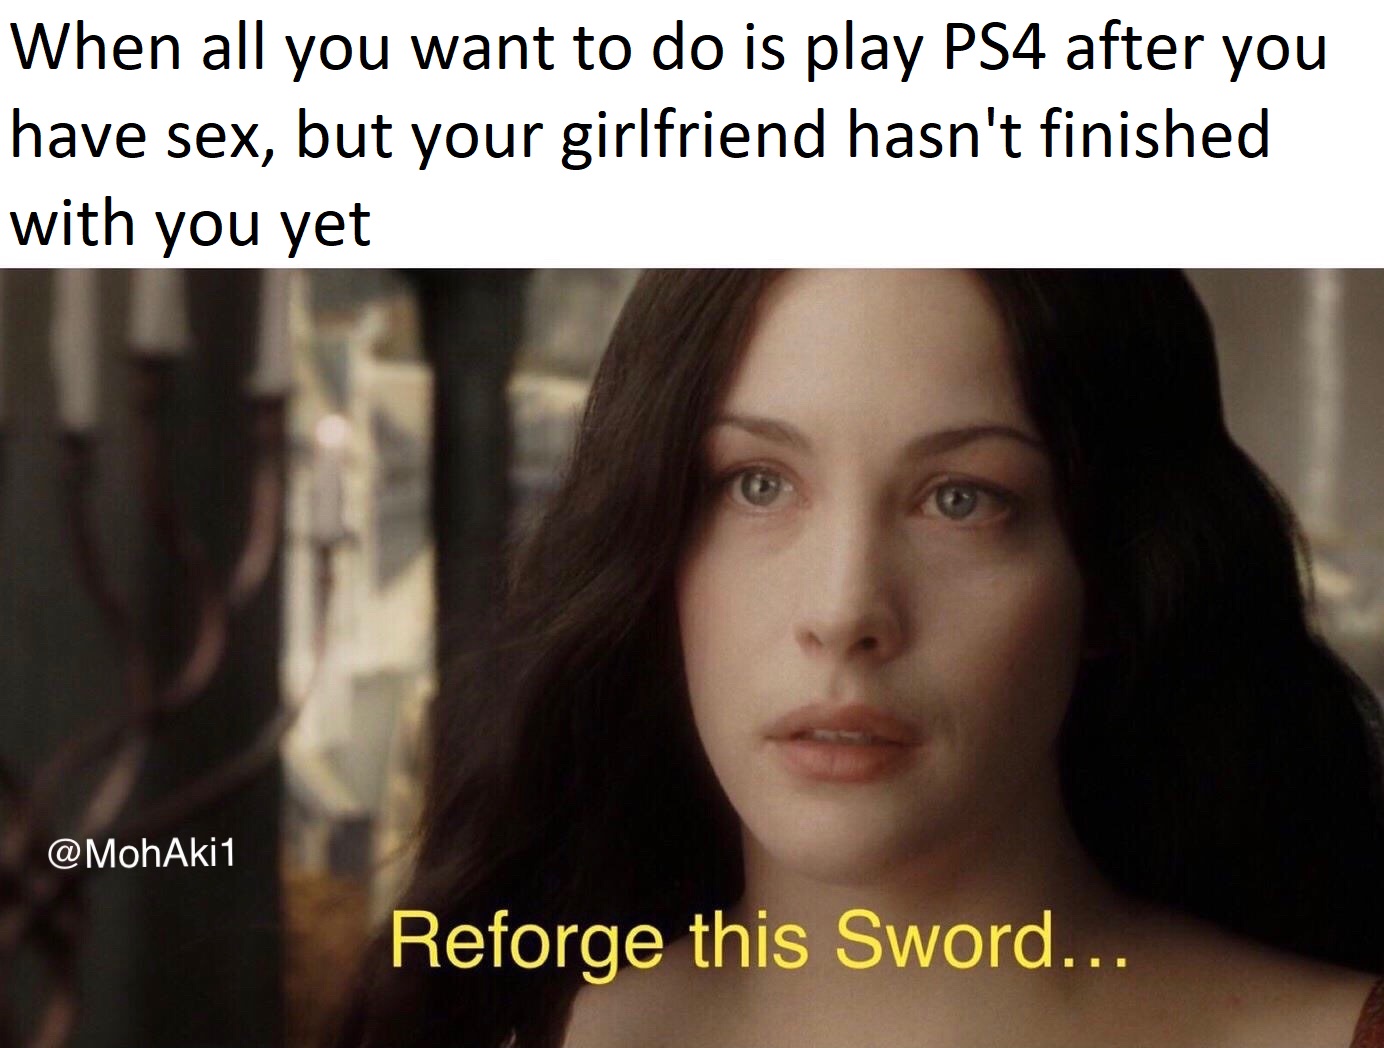 funny memes - When all you want to do is play PS4 after you have sex, but your girlfriend hasn't finished with you yet Reforge this Sword...